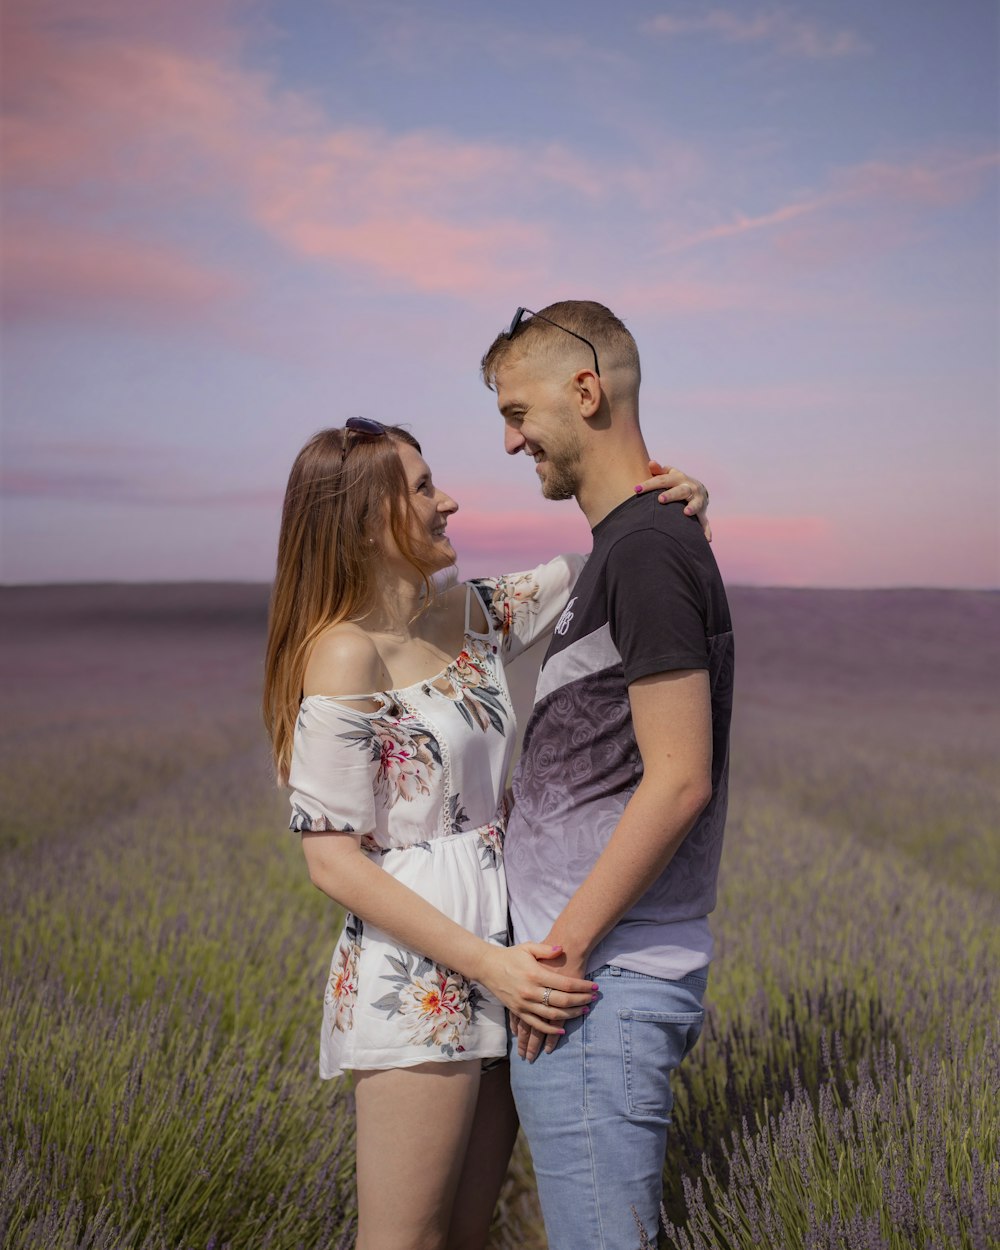 man in black crew neck t-shirt kissing woman in white floral dress on green grass